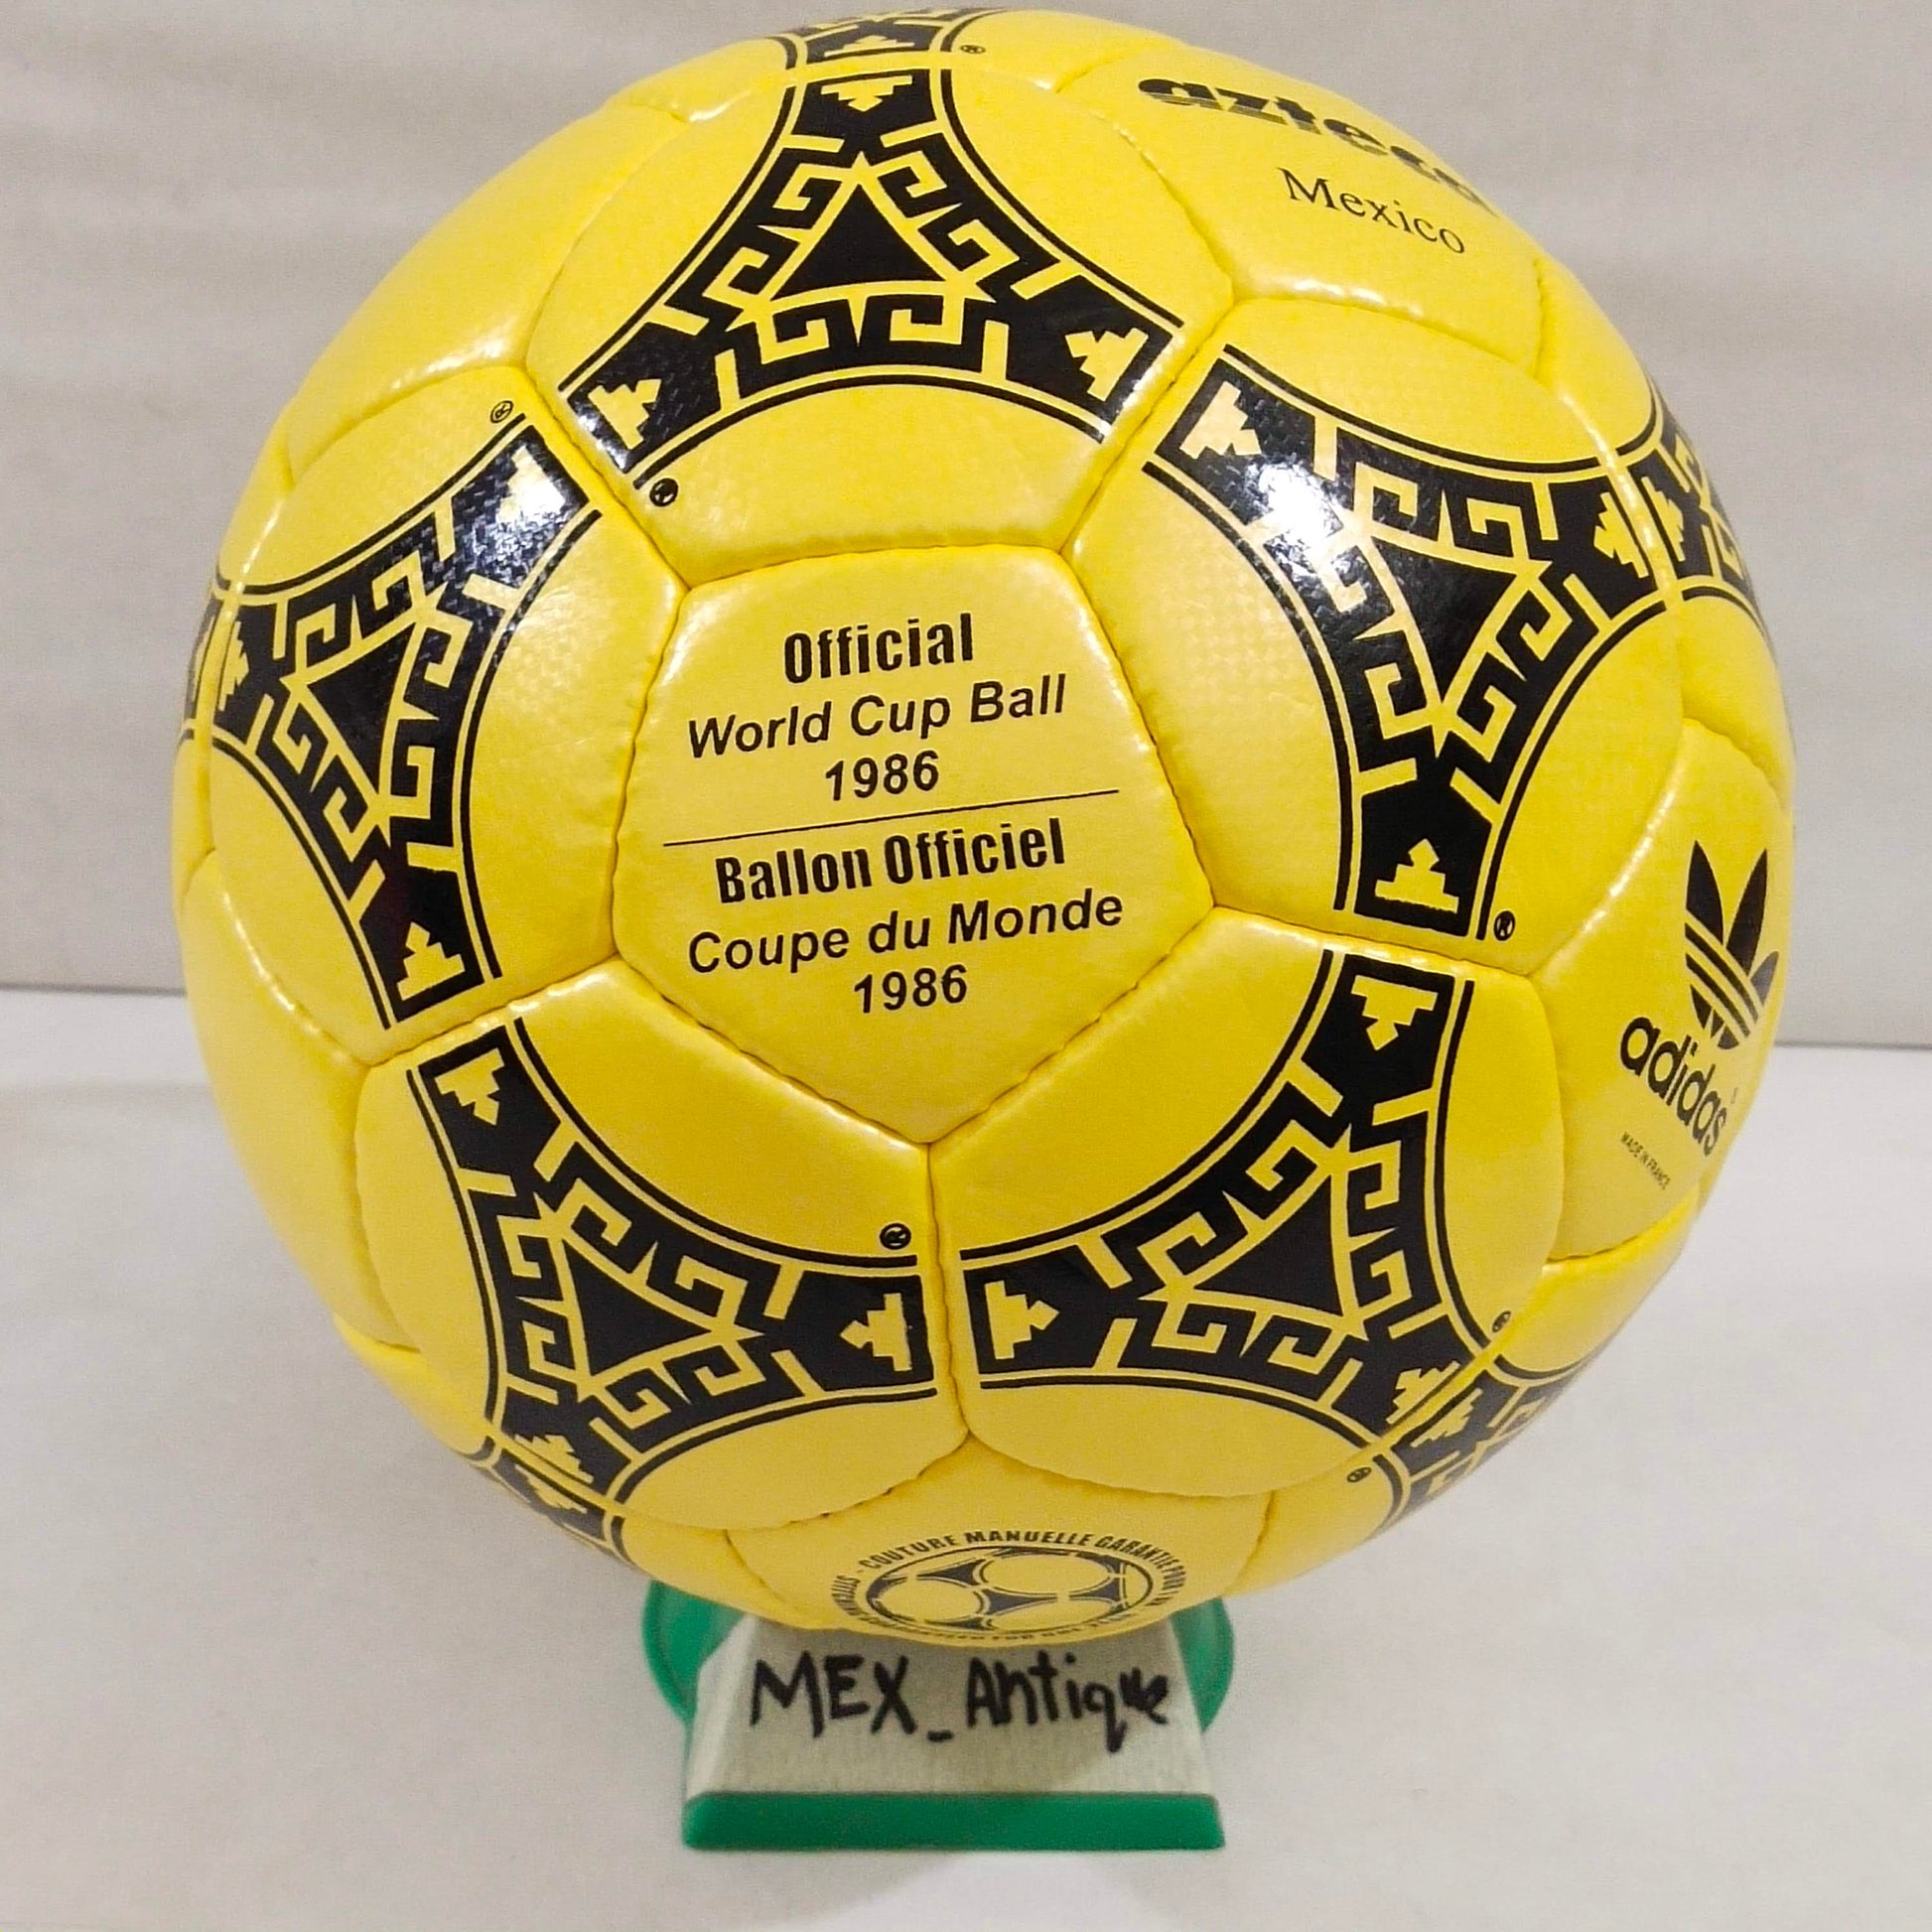 Adidas Azteca Mexico | FIFA World Cup 1986 | Yellow Winter Ball l SIZE 5 03